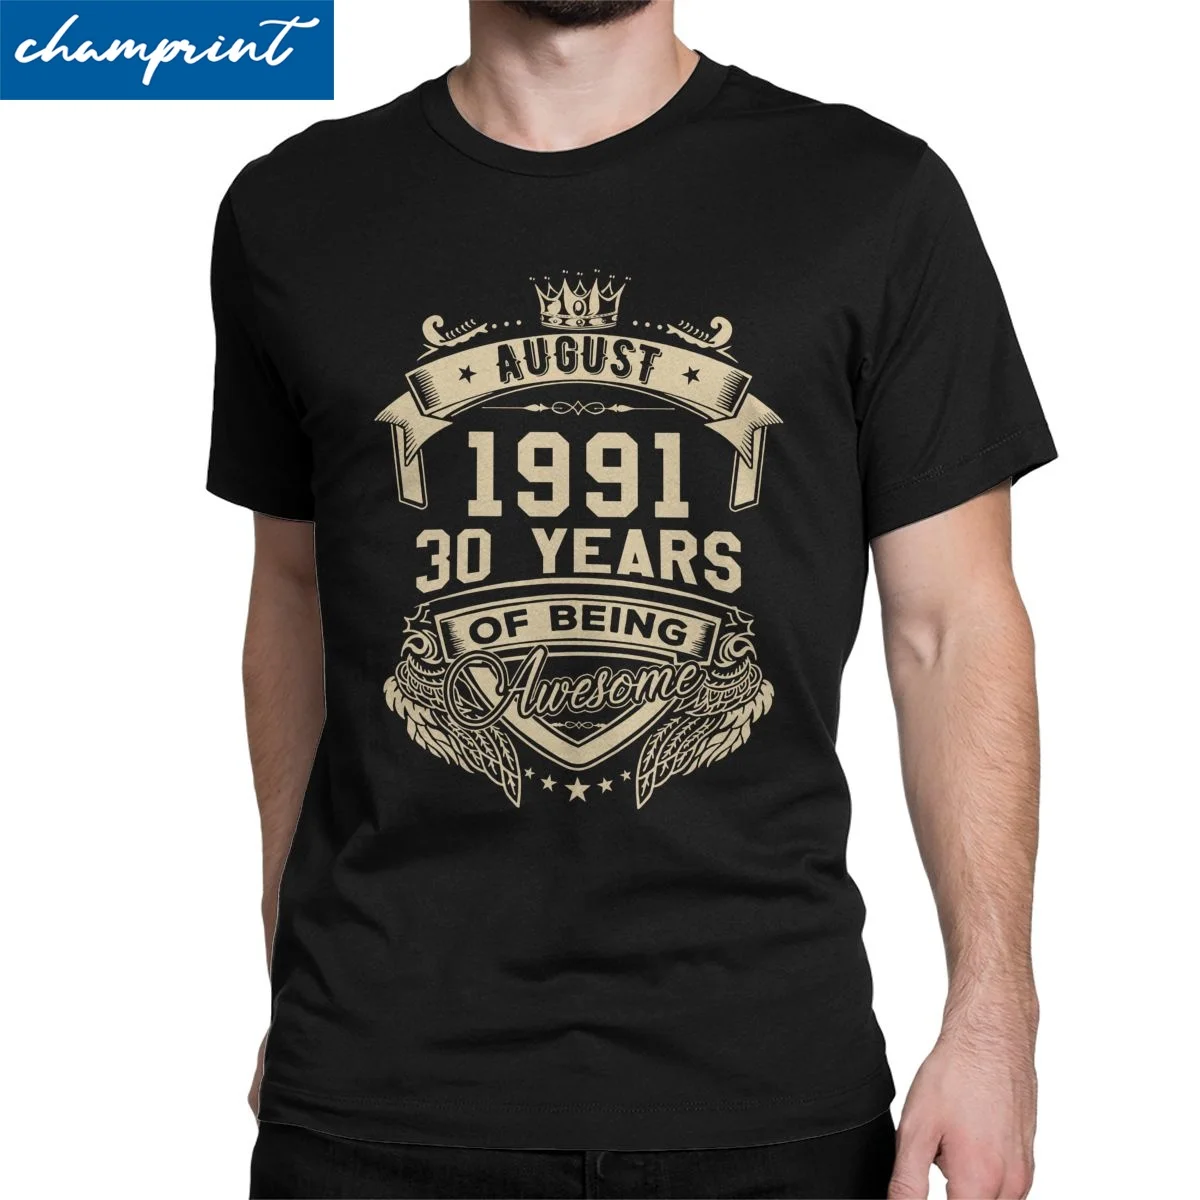 

Born In August 1991 30 Years Of Being Awesome Limited T Shirt Men Women T-Shirts 30th Birthday Gift Tees Party Clothing